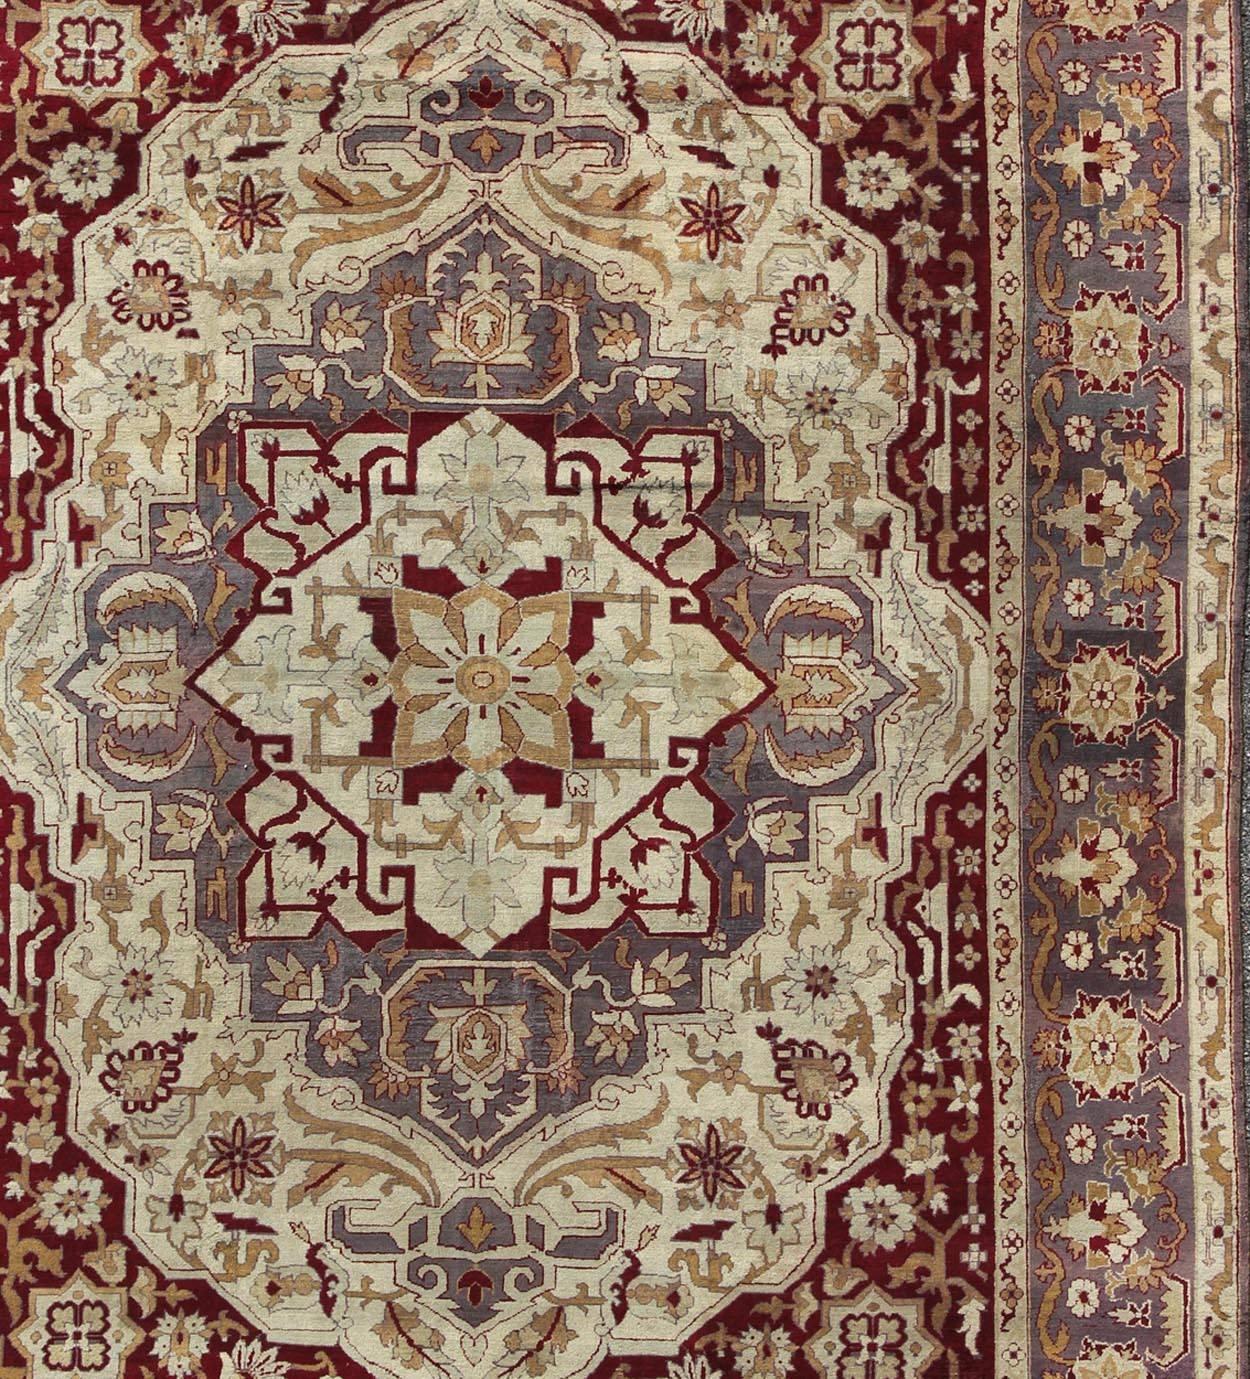 Antique 19th Century Indian Agra Carpet with a Floral Medallion Design In Good Condition For Sale In Atlanta, GA